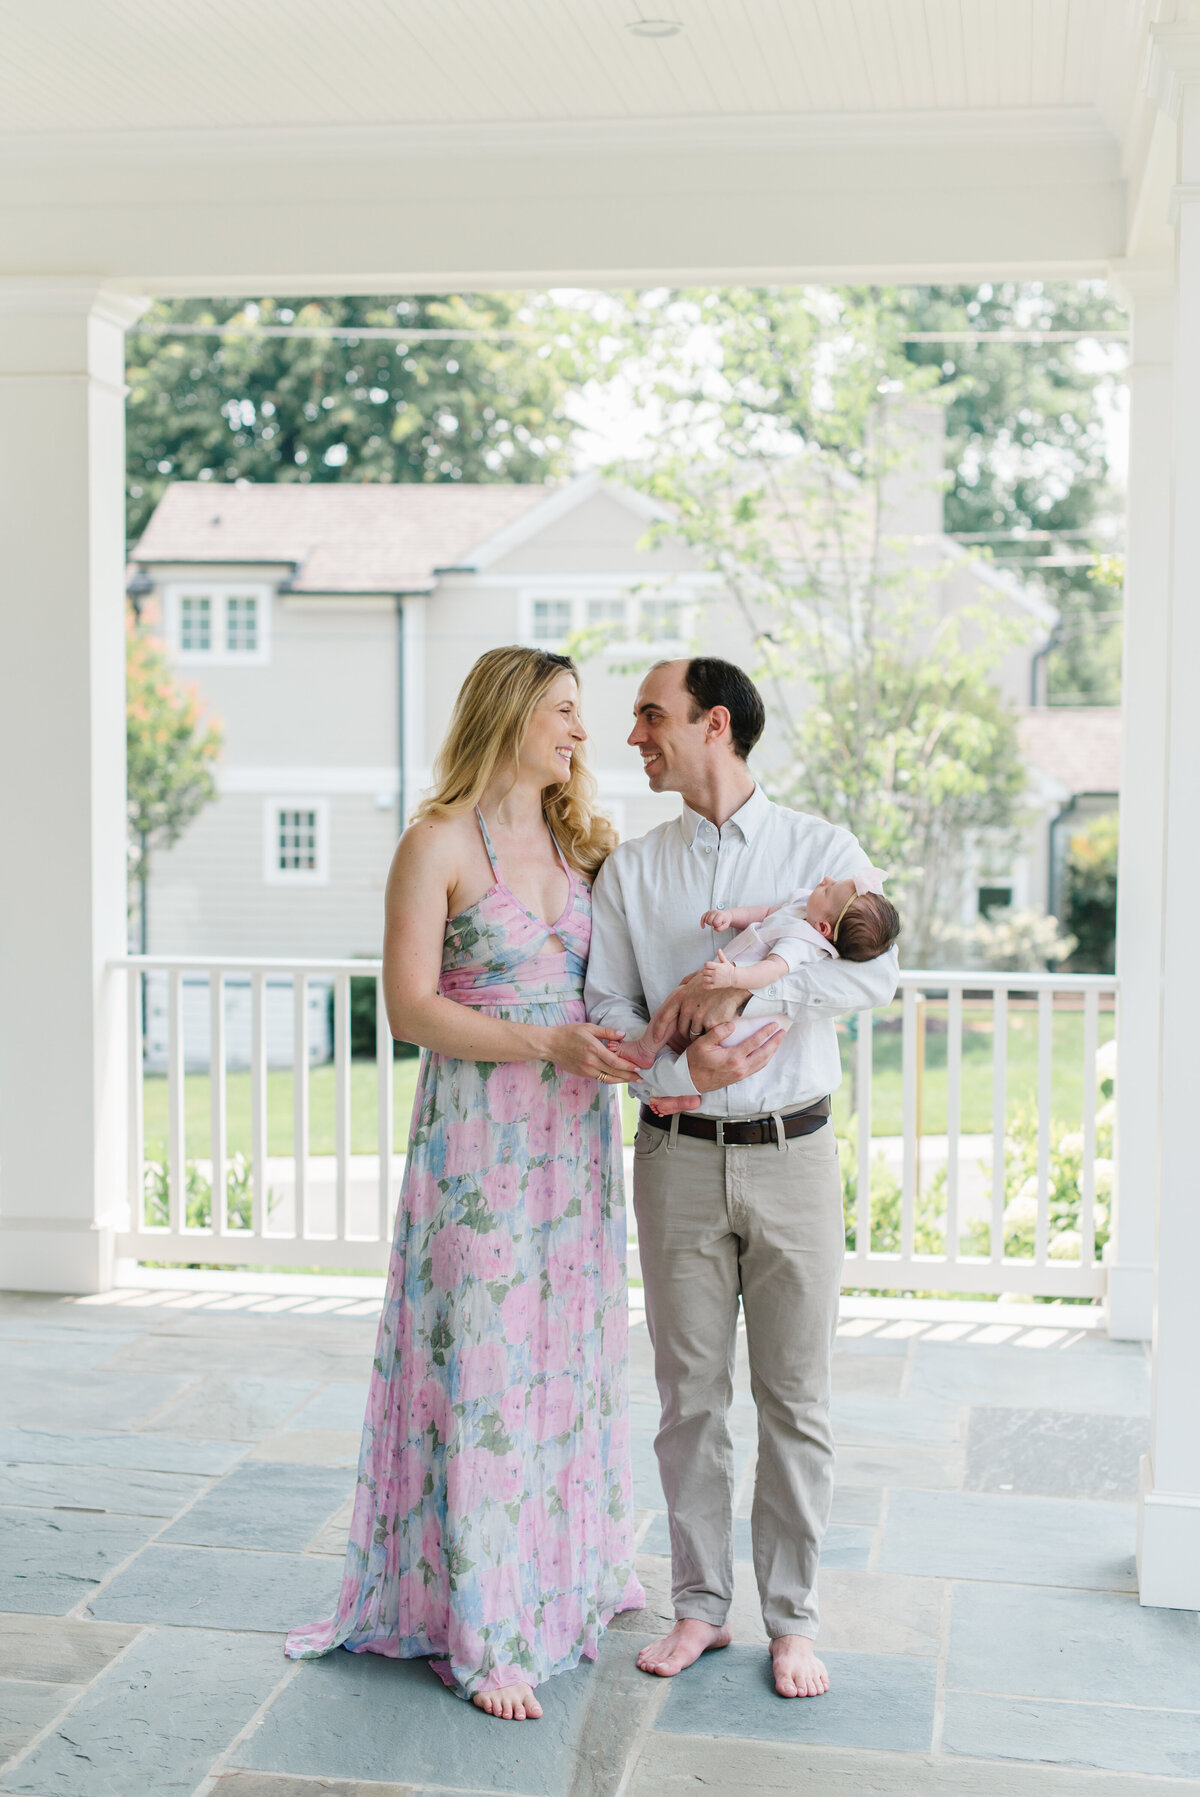 Couple holding their baby and smiling on a porch